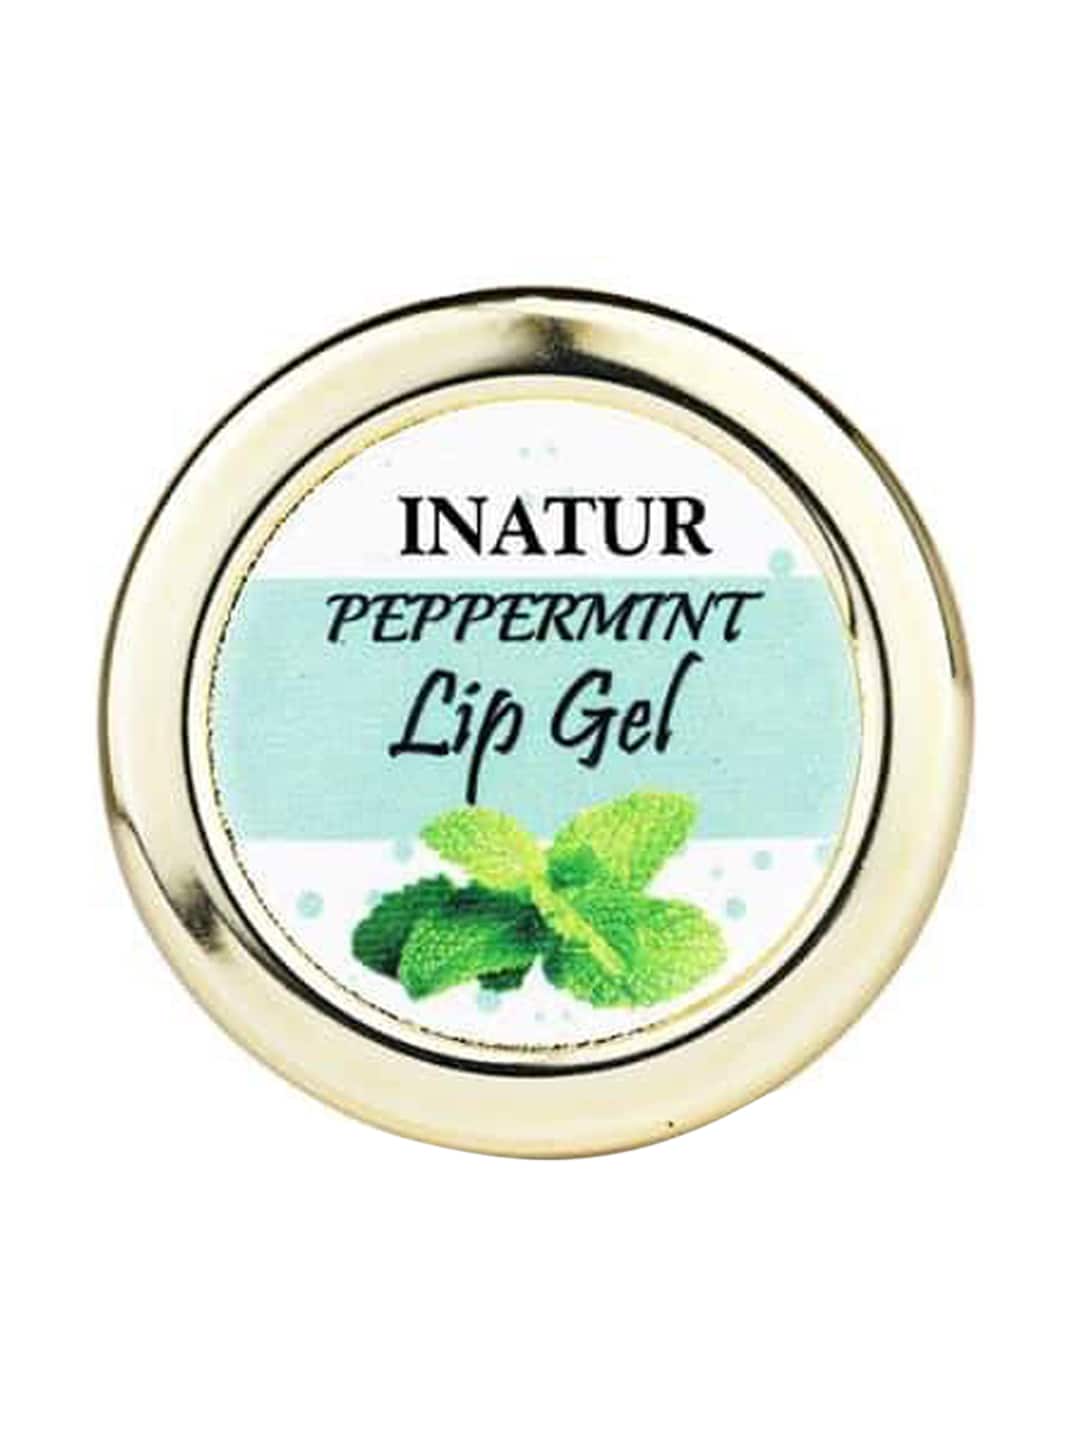 Inatur Peppermint Lip Gel with Apricot & Olive Oil 10 g Price in India